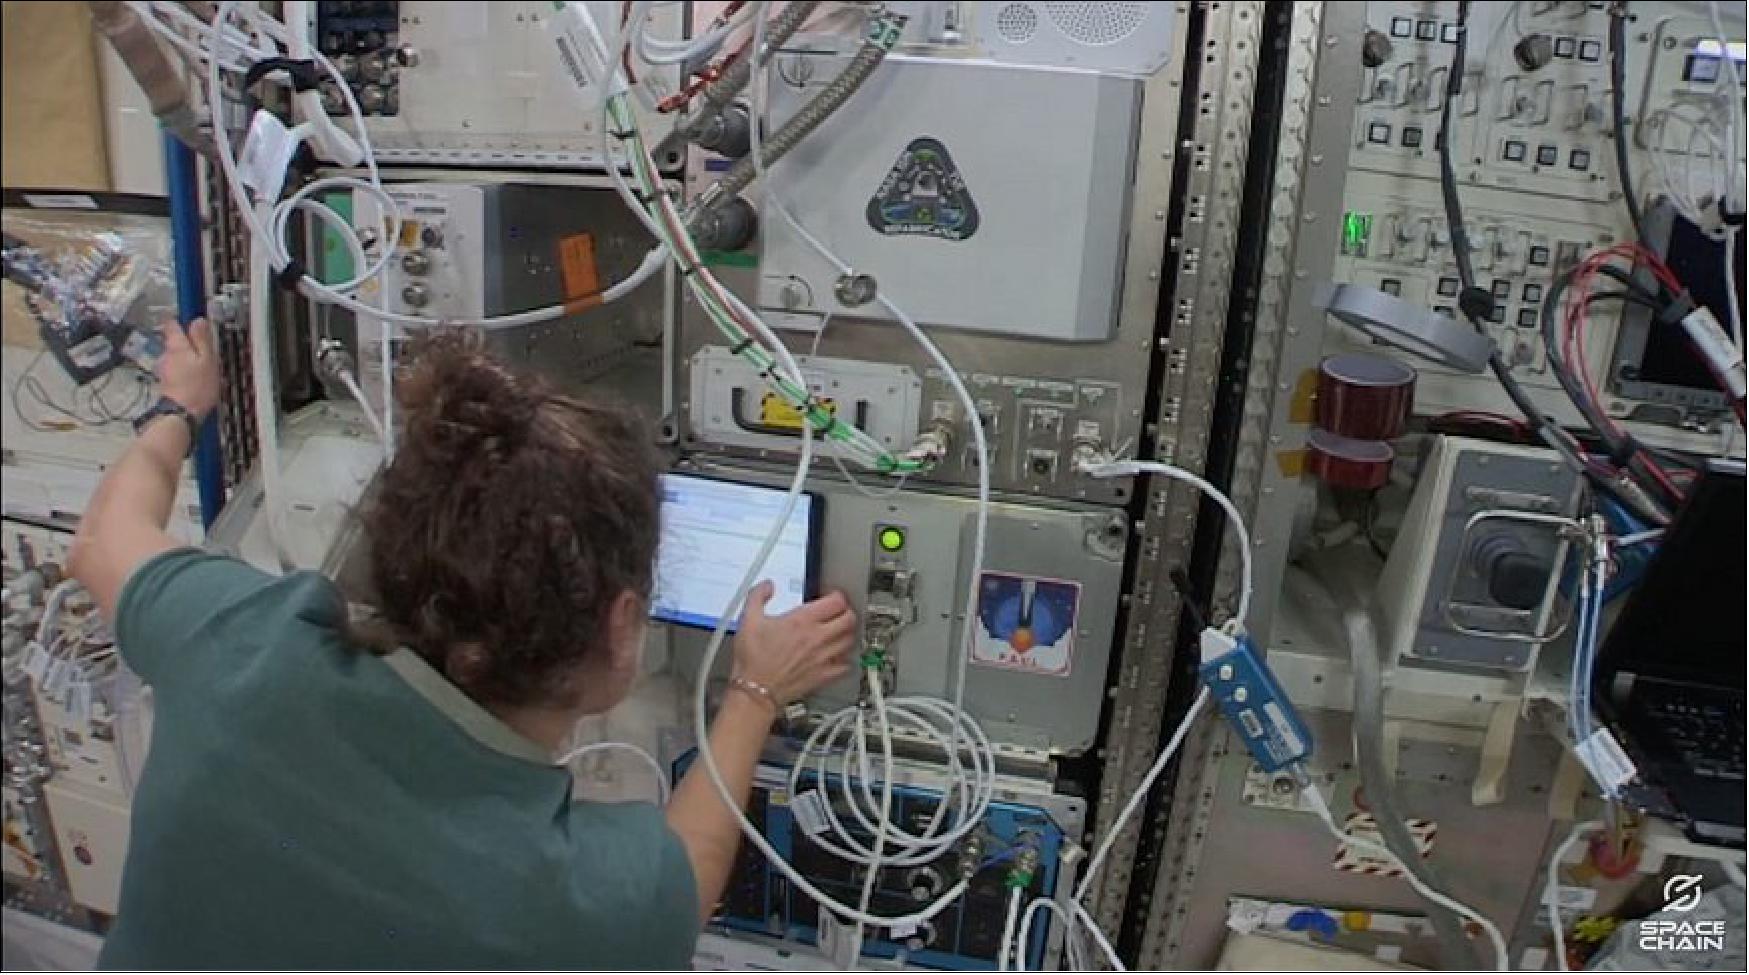 Figure 7: NASA astronaut Jessica Meir installed SpaceChain's multisignature blockchain payload housed in a 1U Nanoracks Nanolab on the International Space Station in 2020 (image credit: YouTube screenshot)